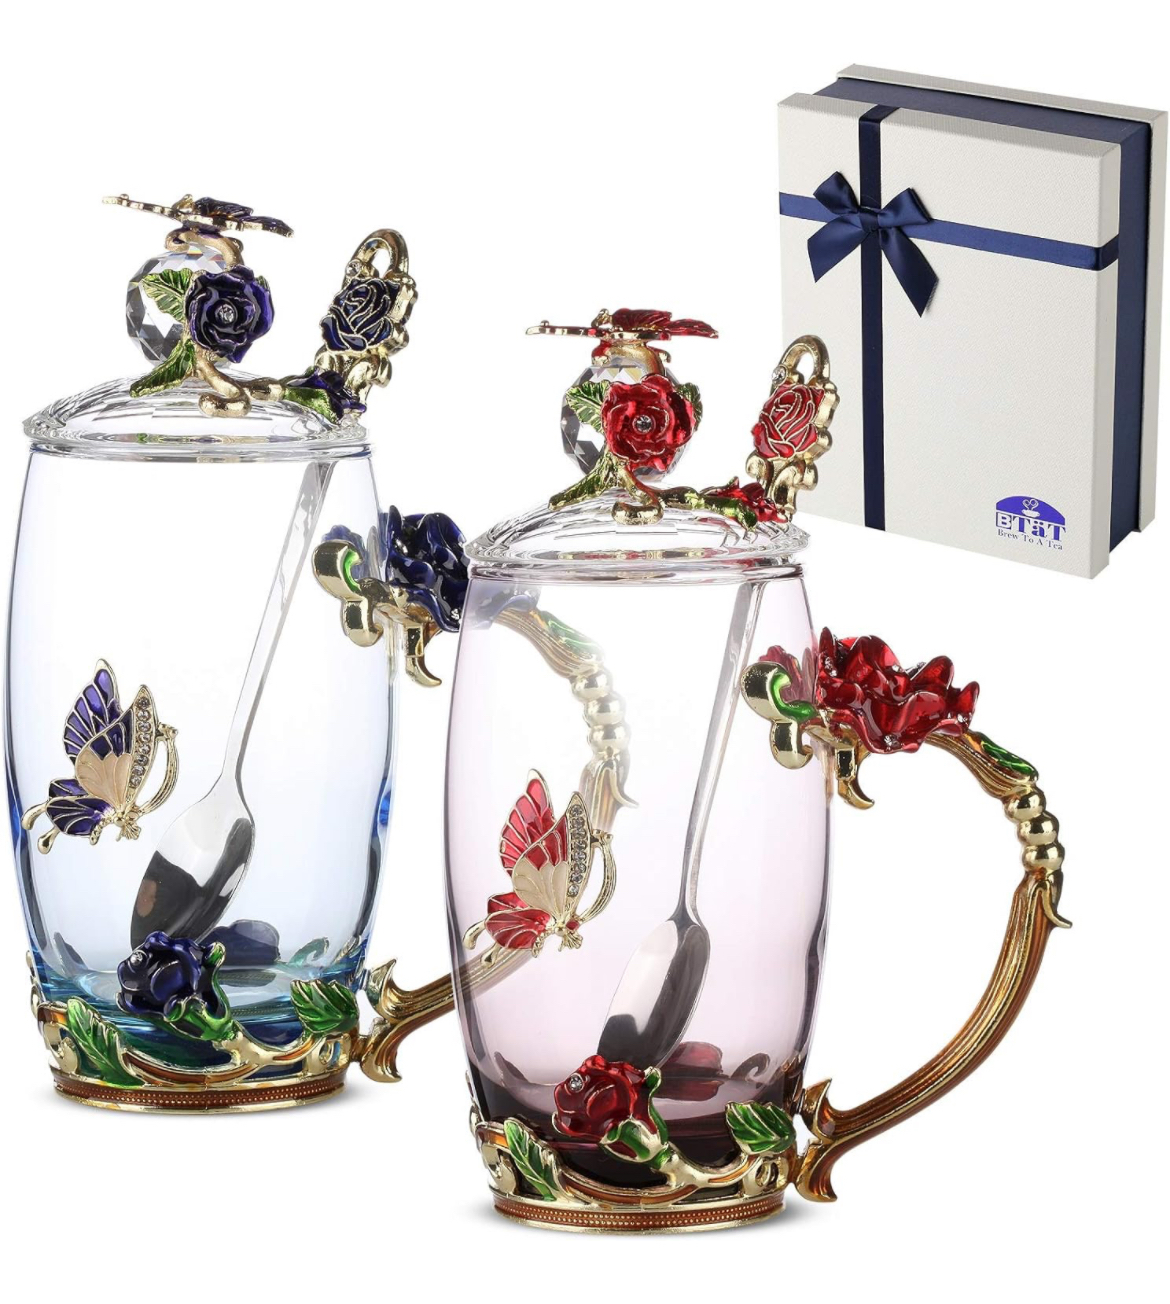 Two glass cups featuring flowers and butterflies